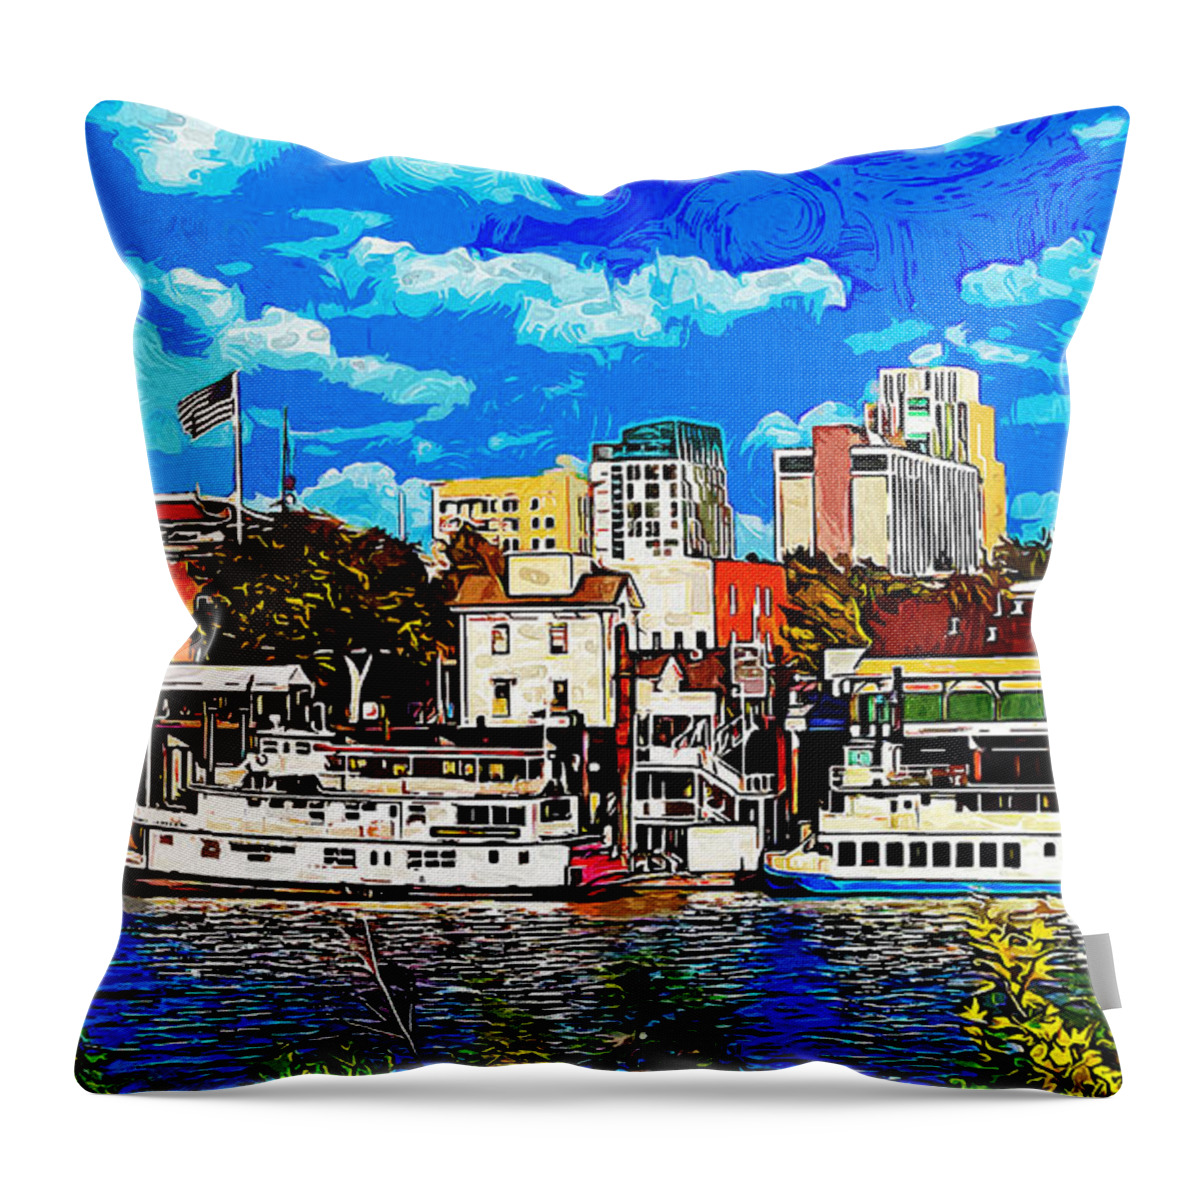 Sacramento Throw Pillow featuring the digital art Sacramento cityscape from the riverwalk - impressionist painting by Nicko Prints